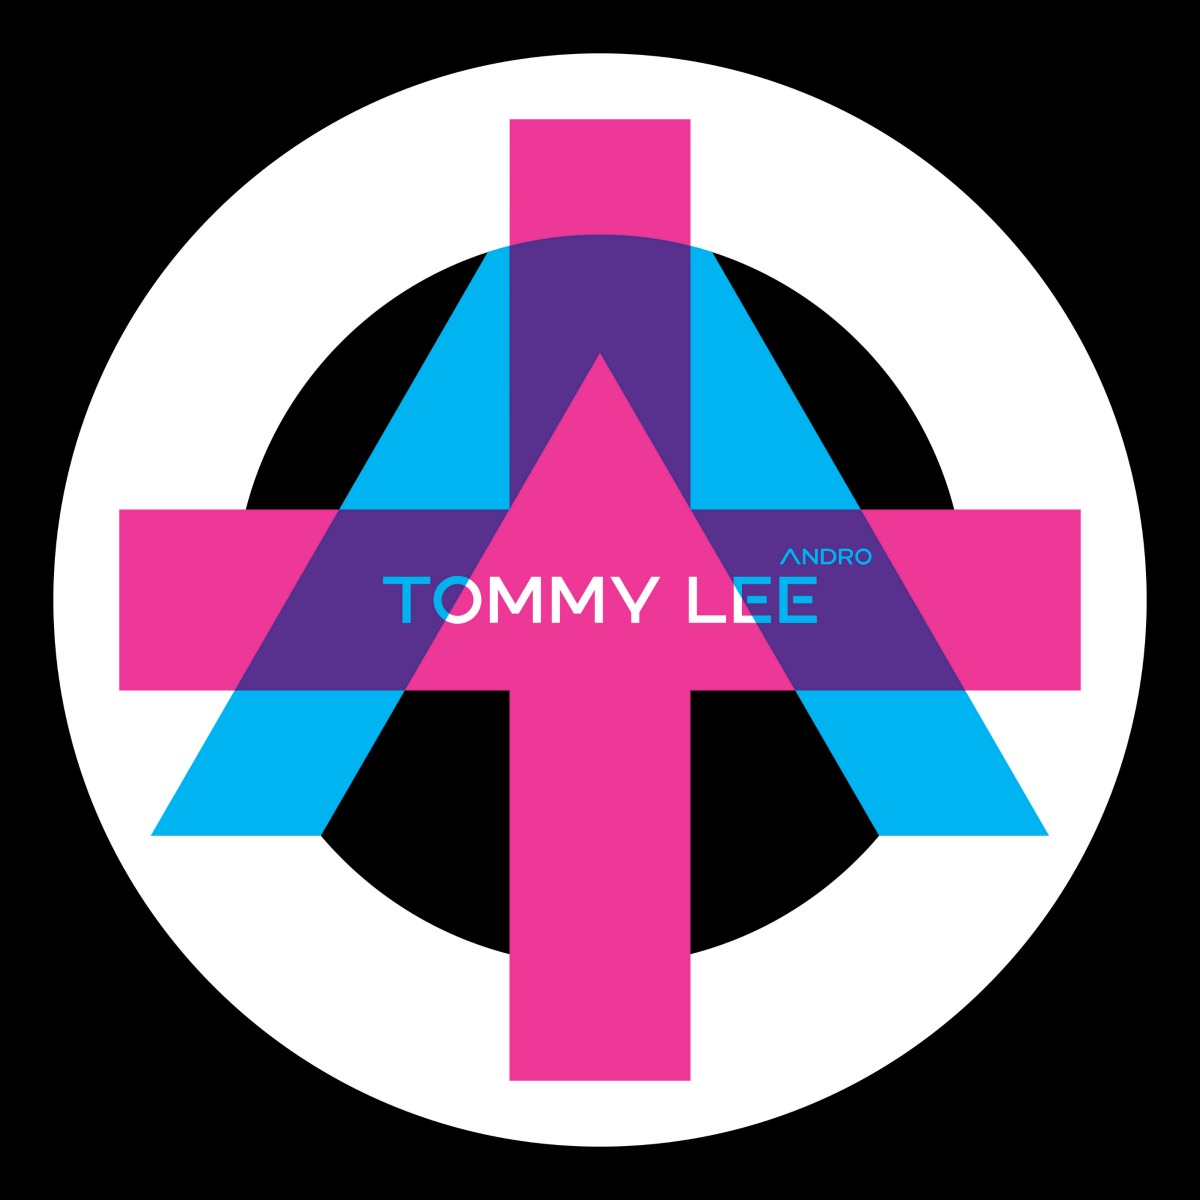 Tommy Lee Andro Album artwork